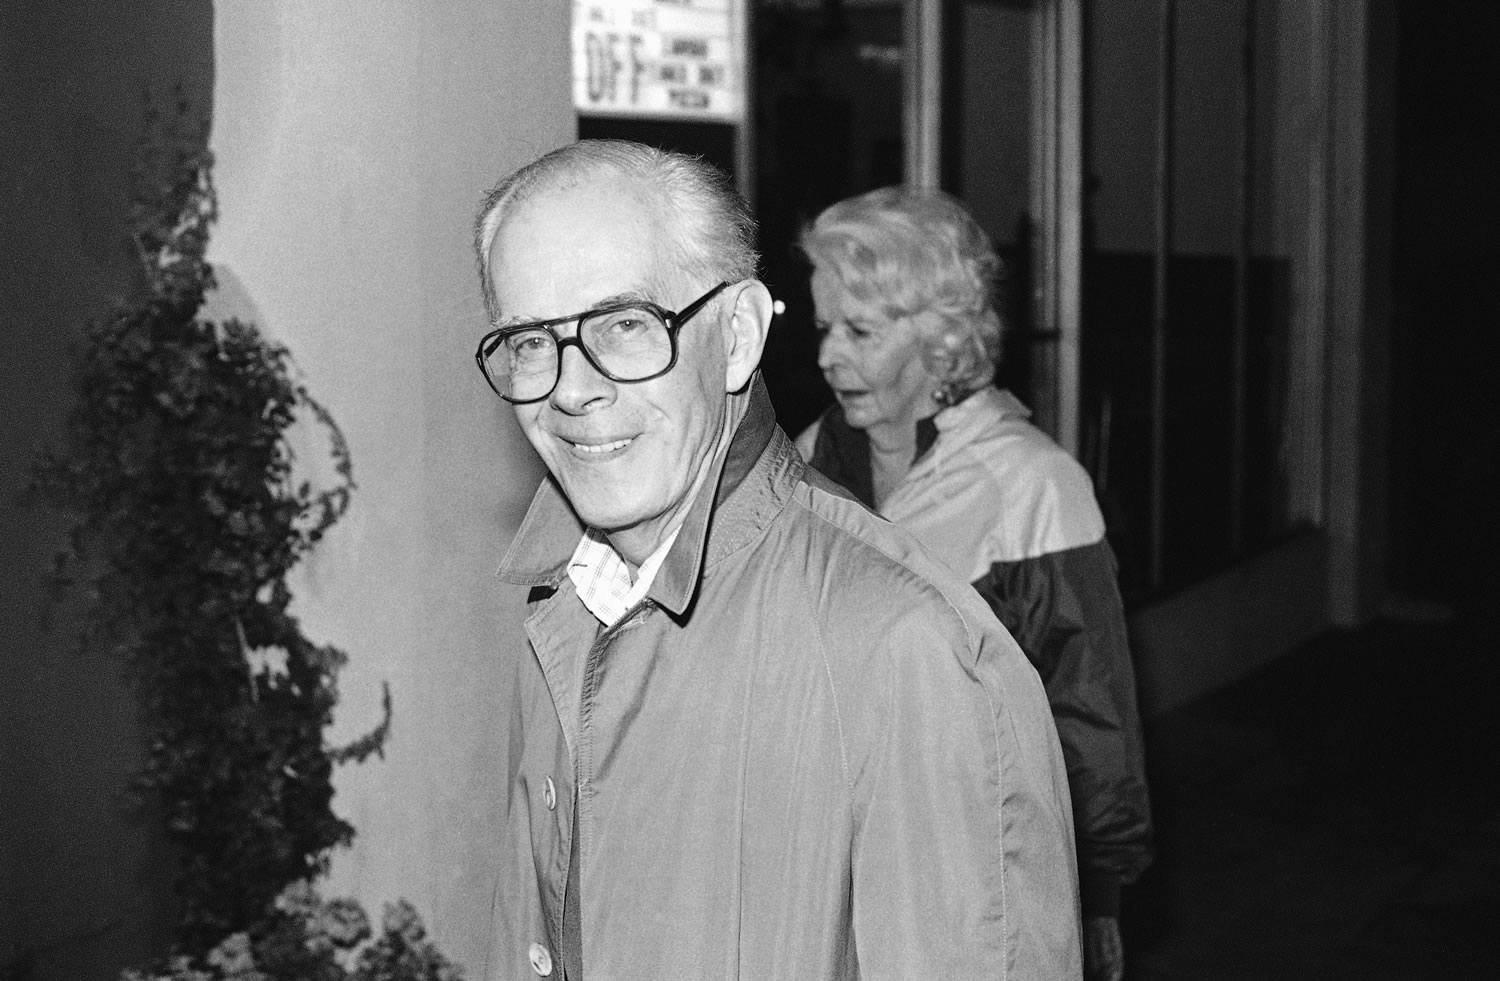 Harry Morgan arrives for the &quot;M*A*S*H*&quot; cast party at a restaurant in 1989 in Los Angeles. The Emmy-winning character actor whose portrayal of the fatherly Col. Potter on television's &quot;M*A*S*H&quot; highlighted a show business career that included nine other TV series, 50 films and the Broadway stage, died Wednesday, Dec. 7, 2011.